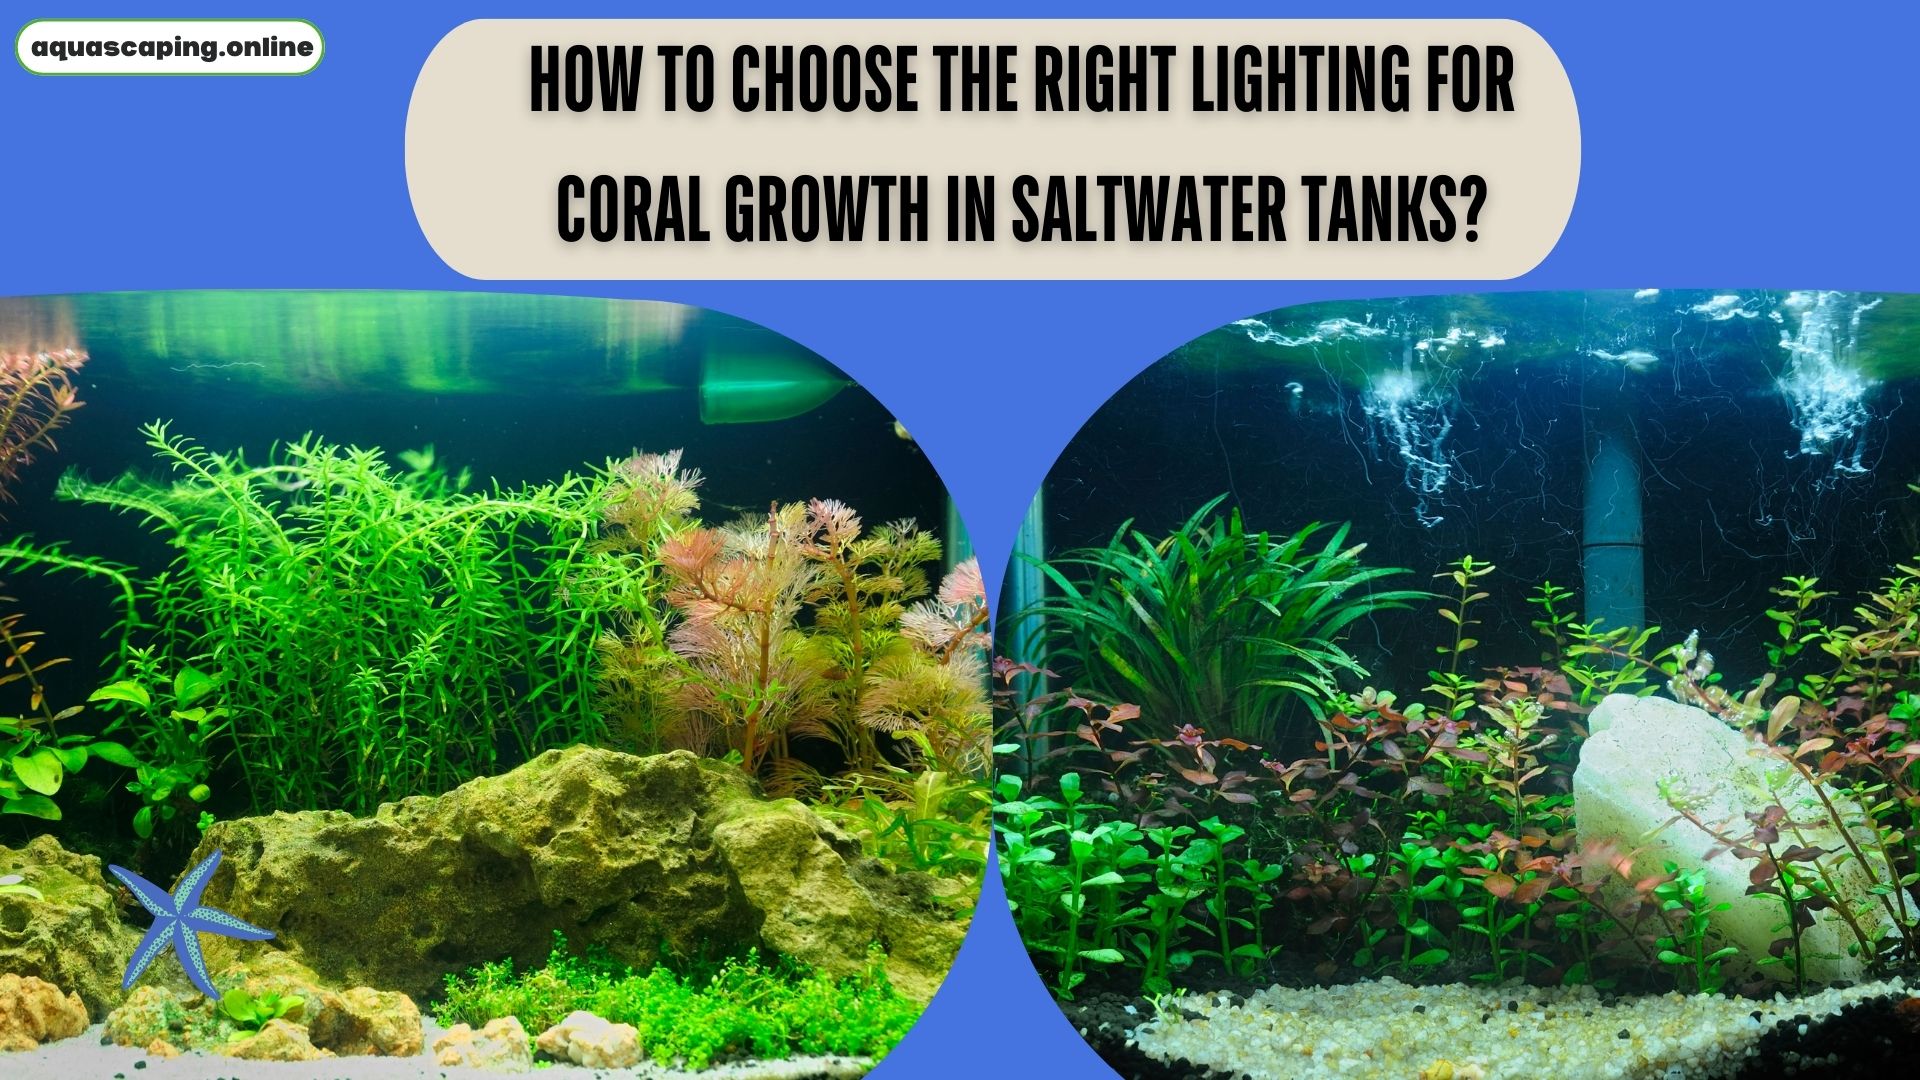 Right lighting for coral growth in saltwater tanks